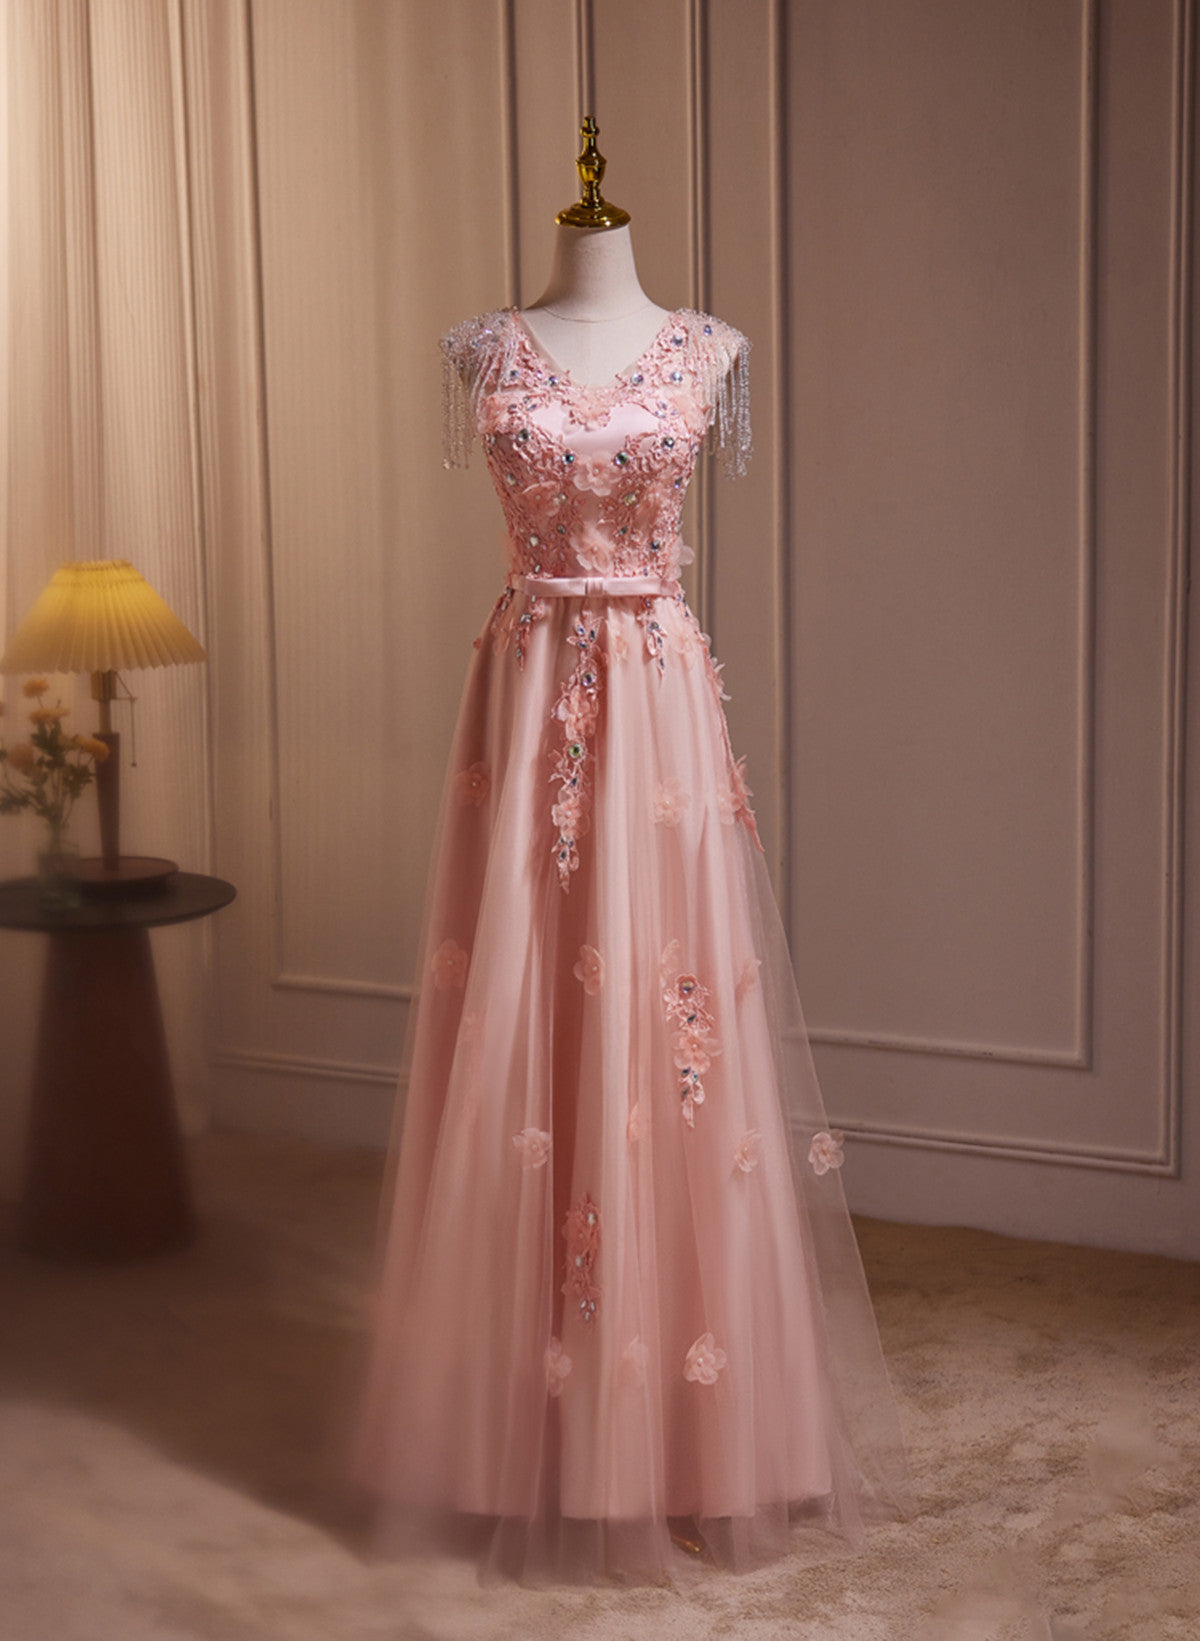 Pink V-neckline Tulle with Lace Applique Prom Dress, Pink Tulle Evening Dress